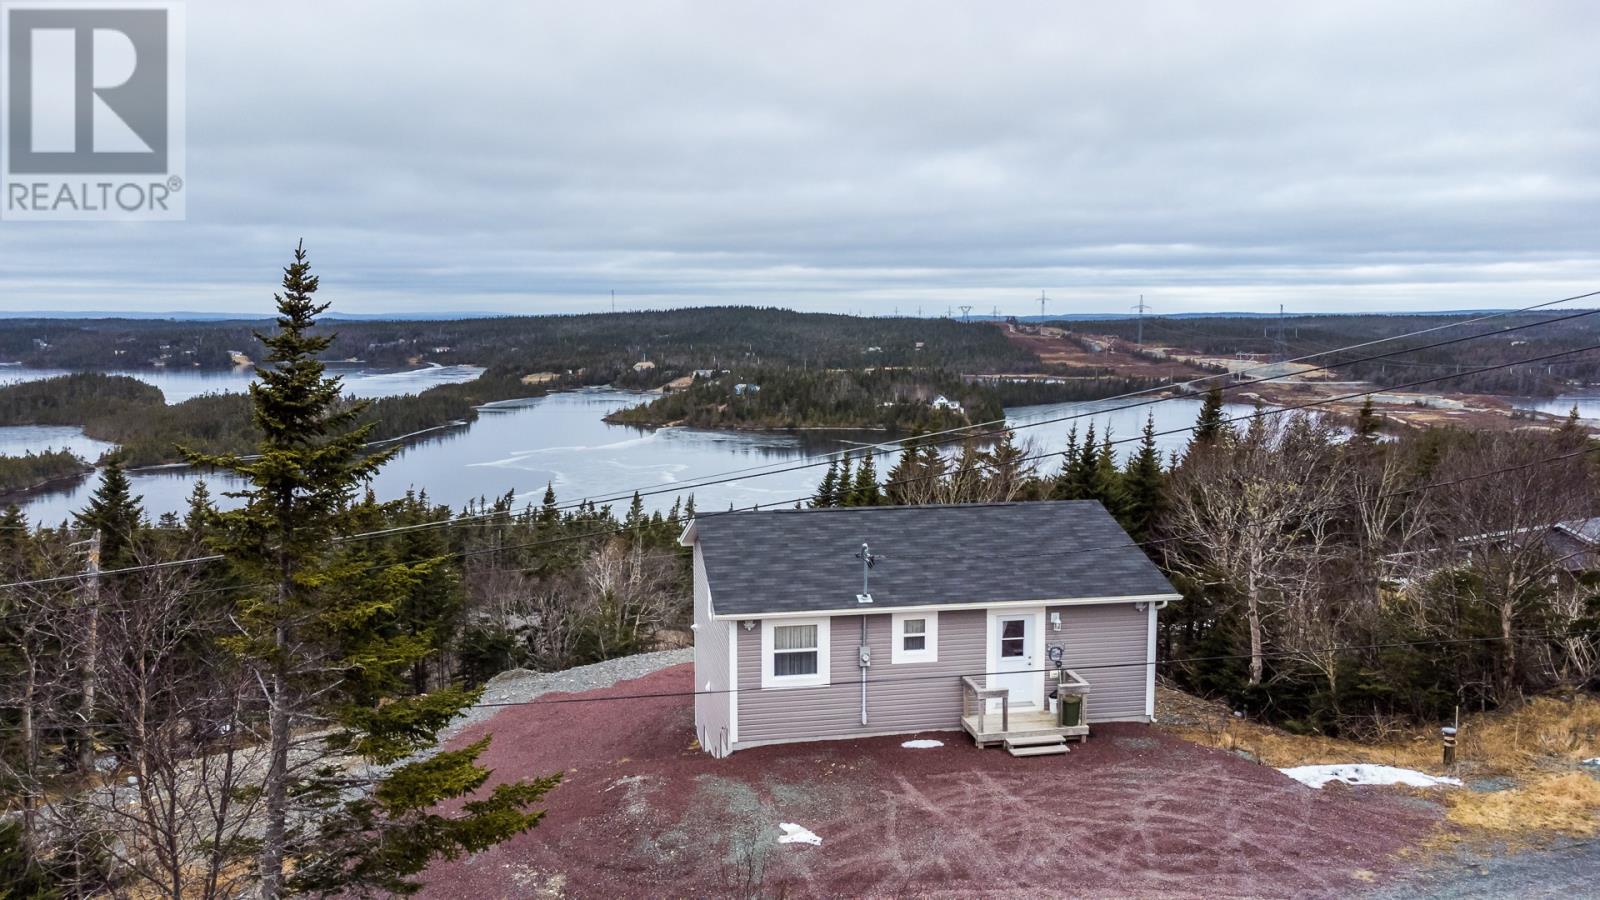 17 Junction Heights located in Brigus Junction, Newfoundland and Labrador